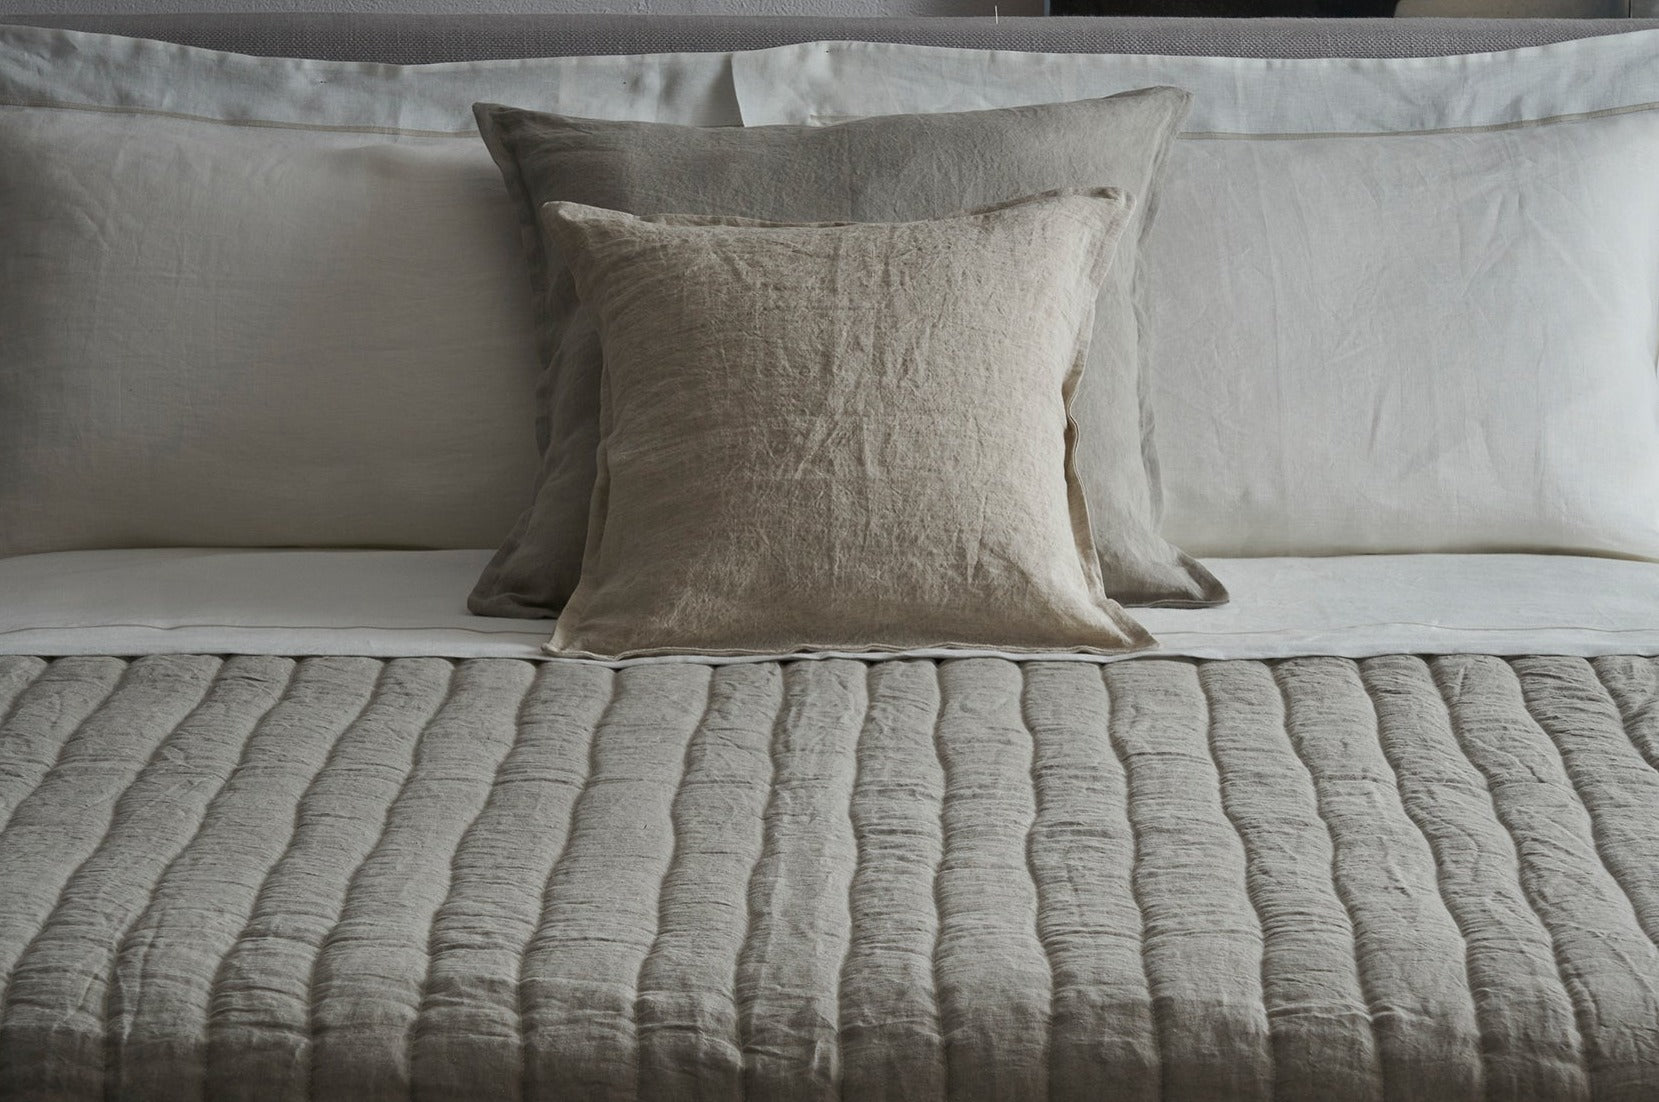 Quilted bedspread righe irregolari Day by Day